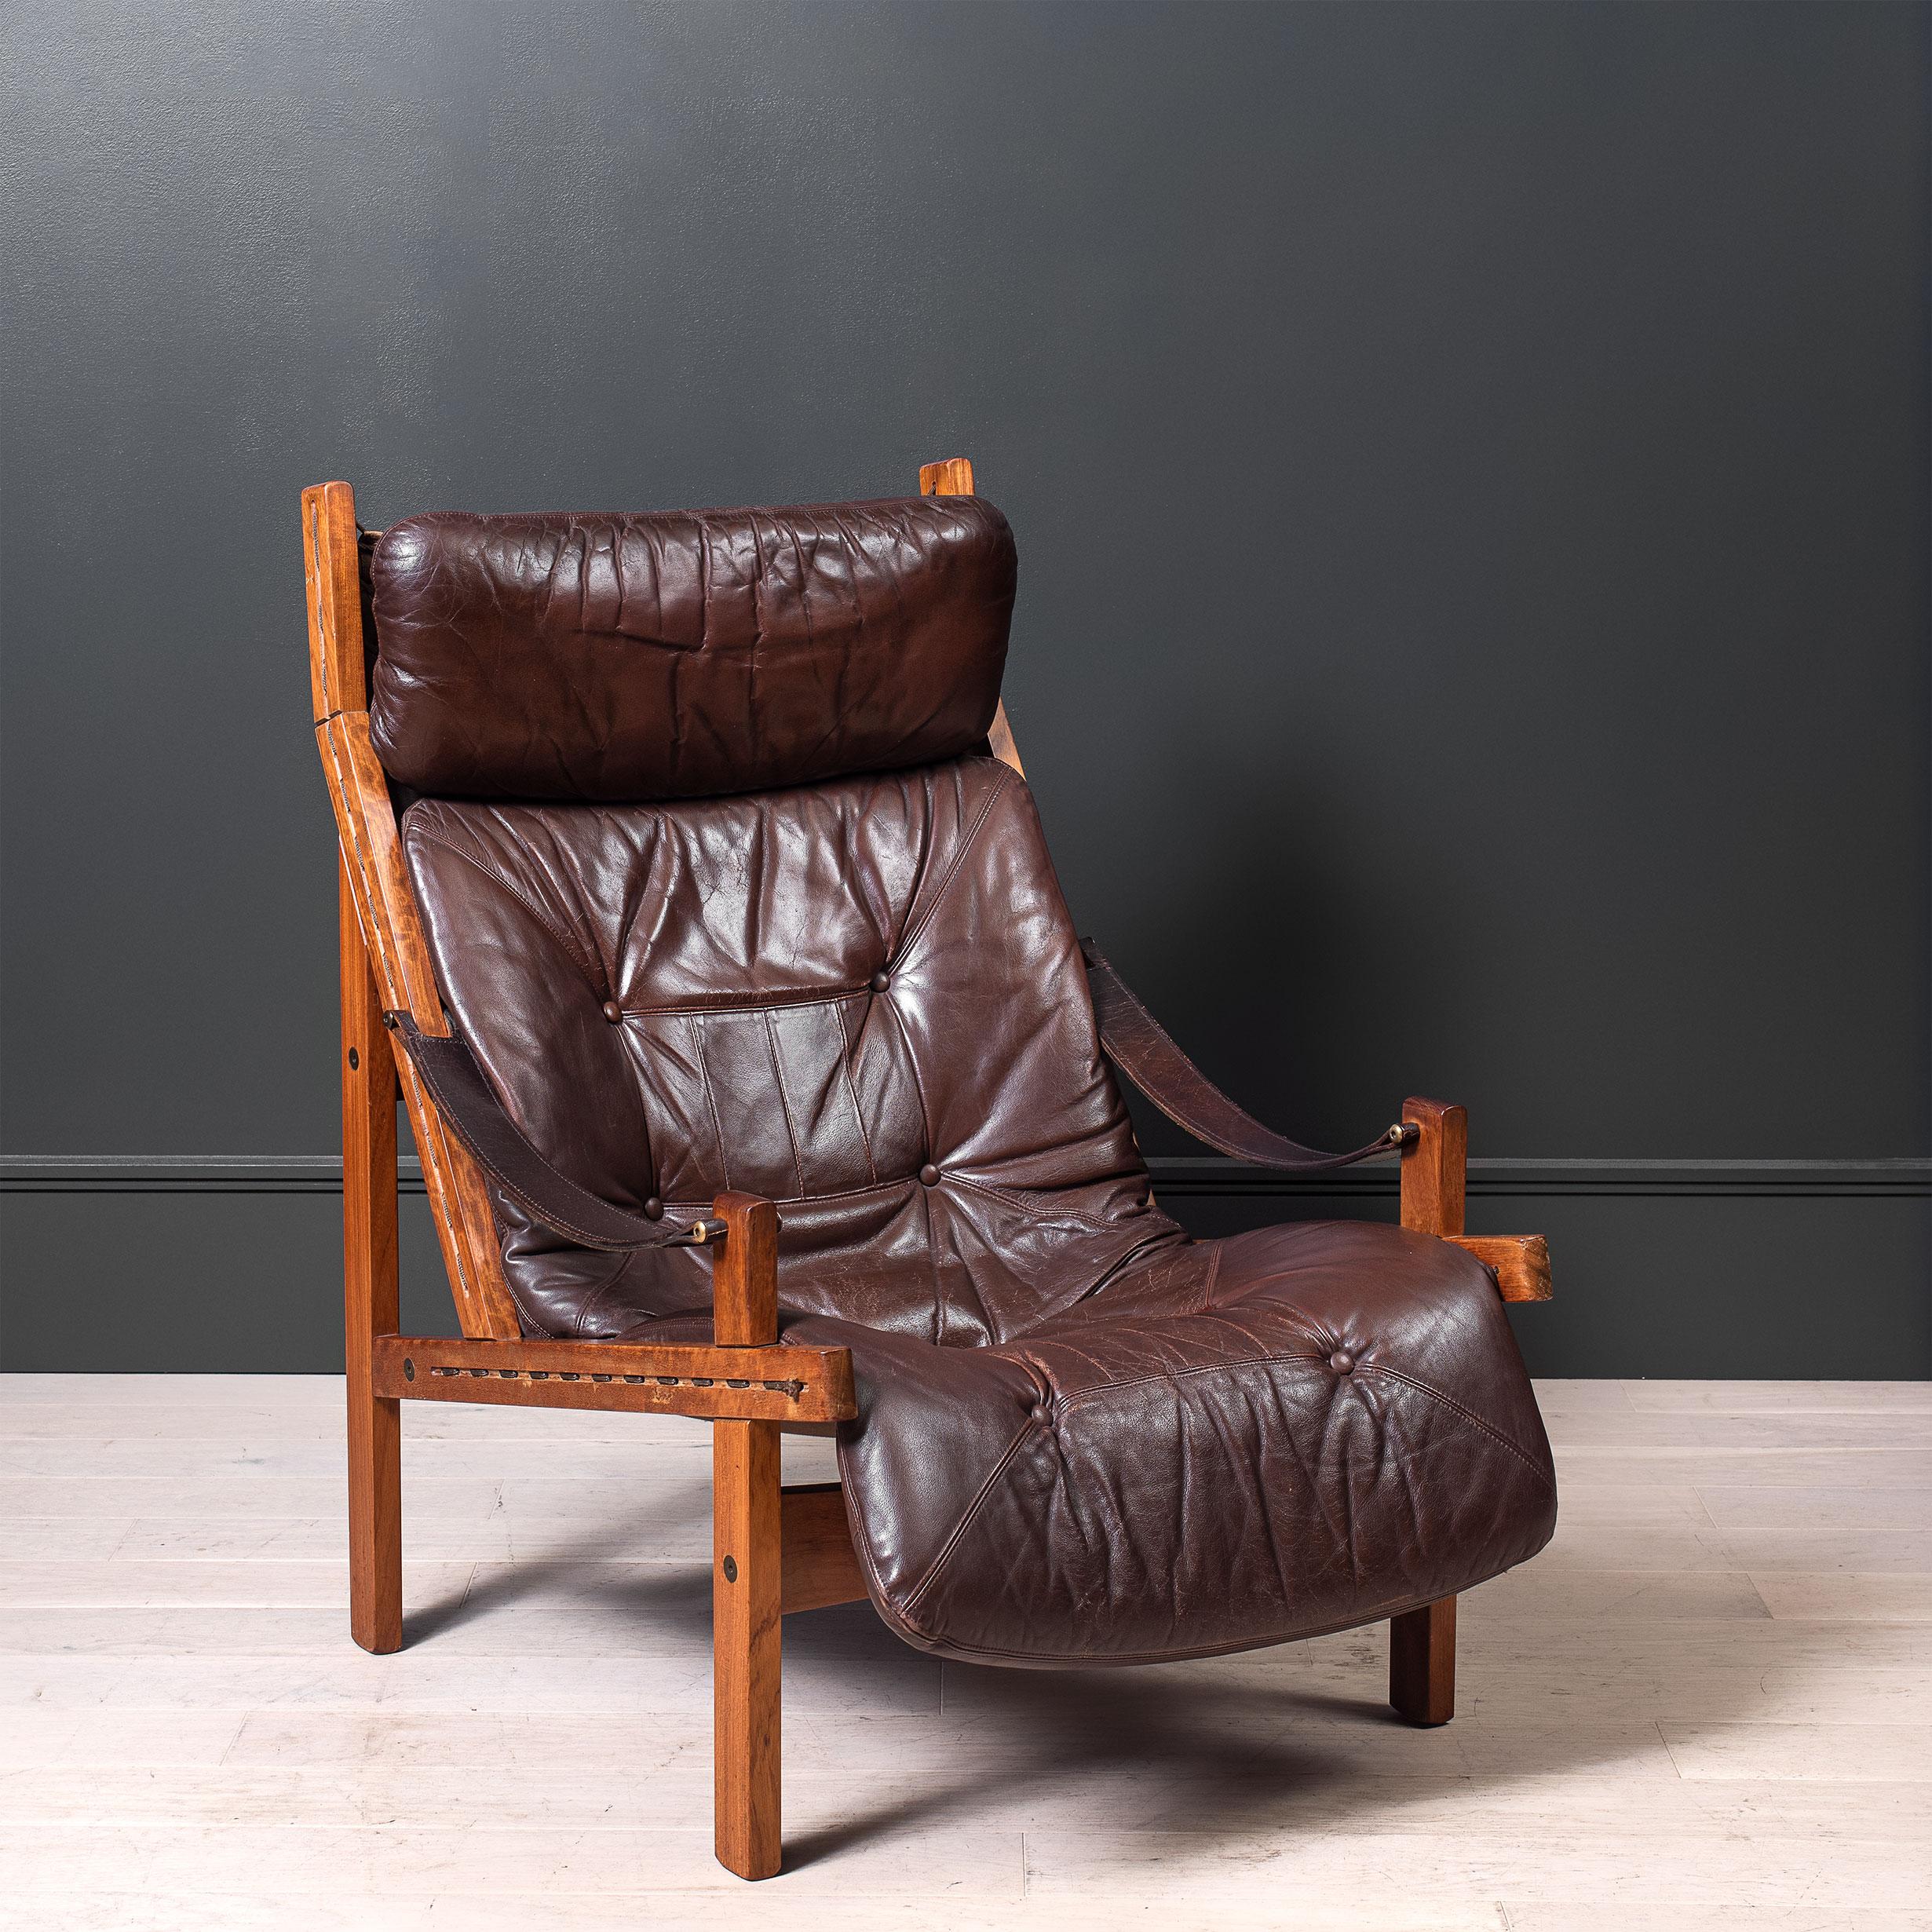 A Torbjorn Afdal Hunter chair produced by Bruksbo, Norway circa 1960.
Original leather and walnut frame.
Very comfortable indeed.
Enquire for international shipping.